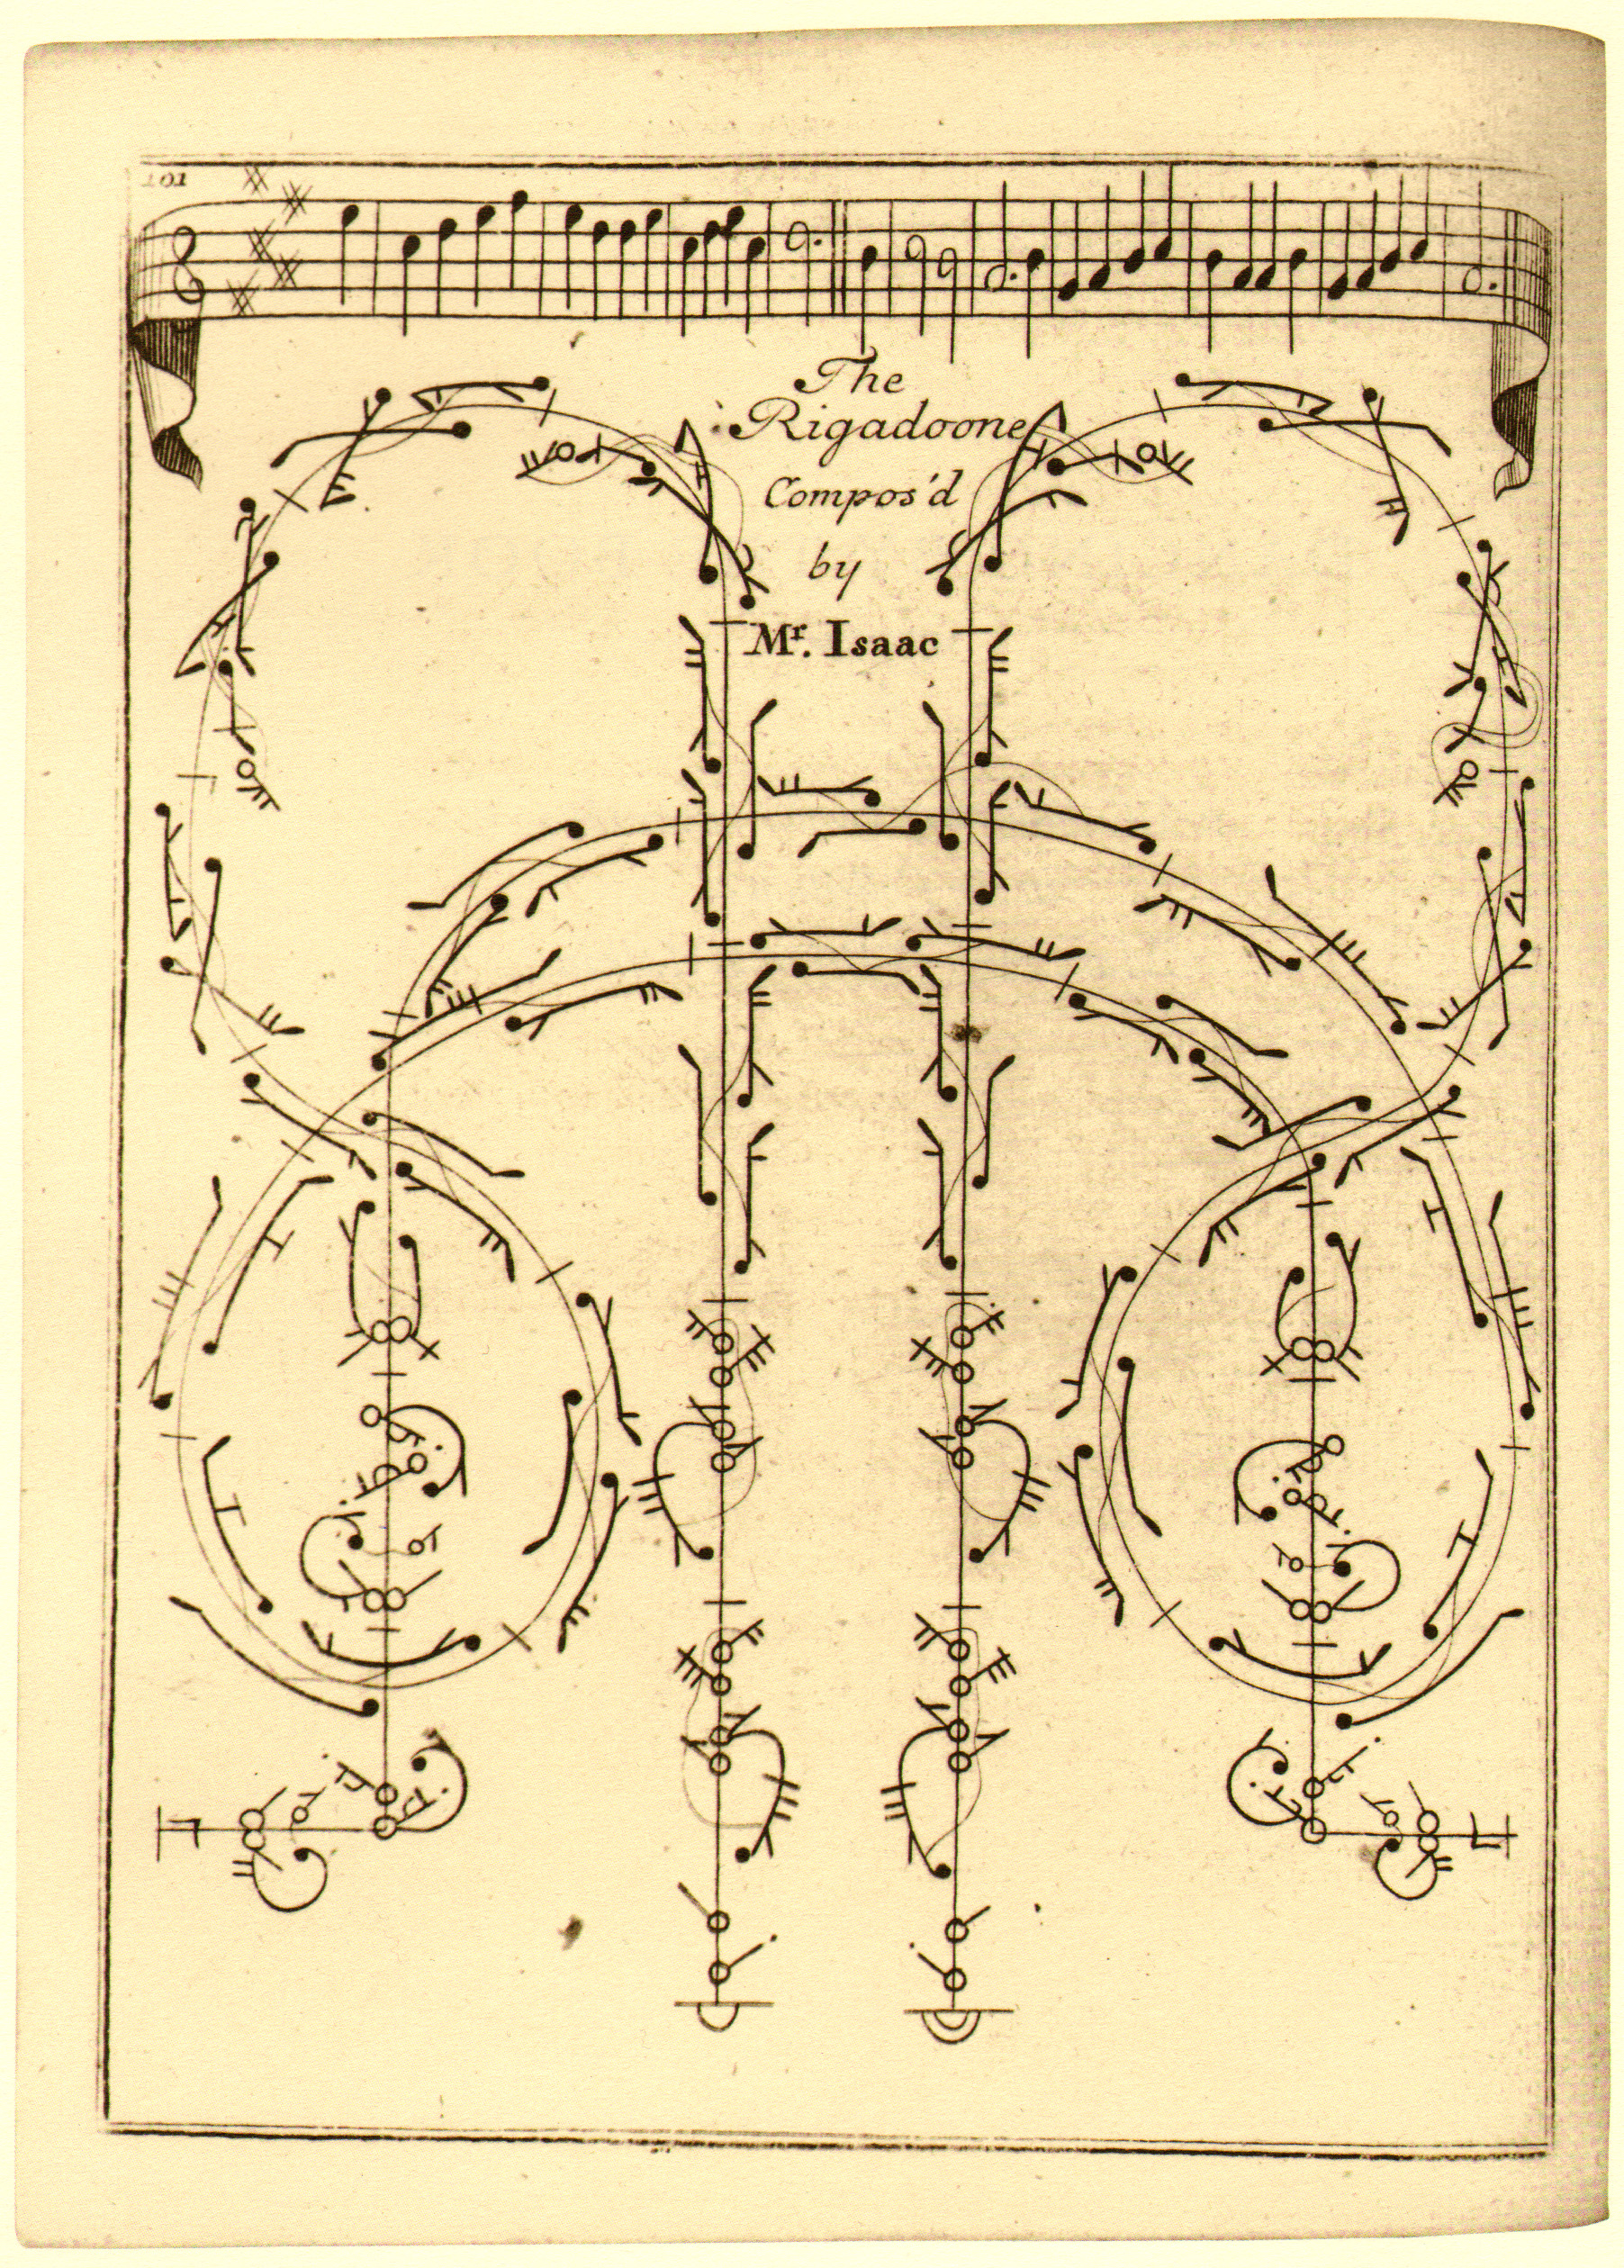 Feuillet's dance notation for a rigadoon by Isaac, first published in Orchesography or the Art of Dancing ... an Exact and Just Translation from the French of Monsieur Feuillet. By John Weaver, Dancing Master. Second edition. London, ca. 1721.